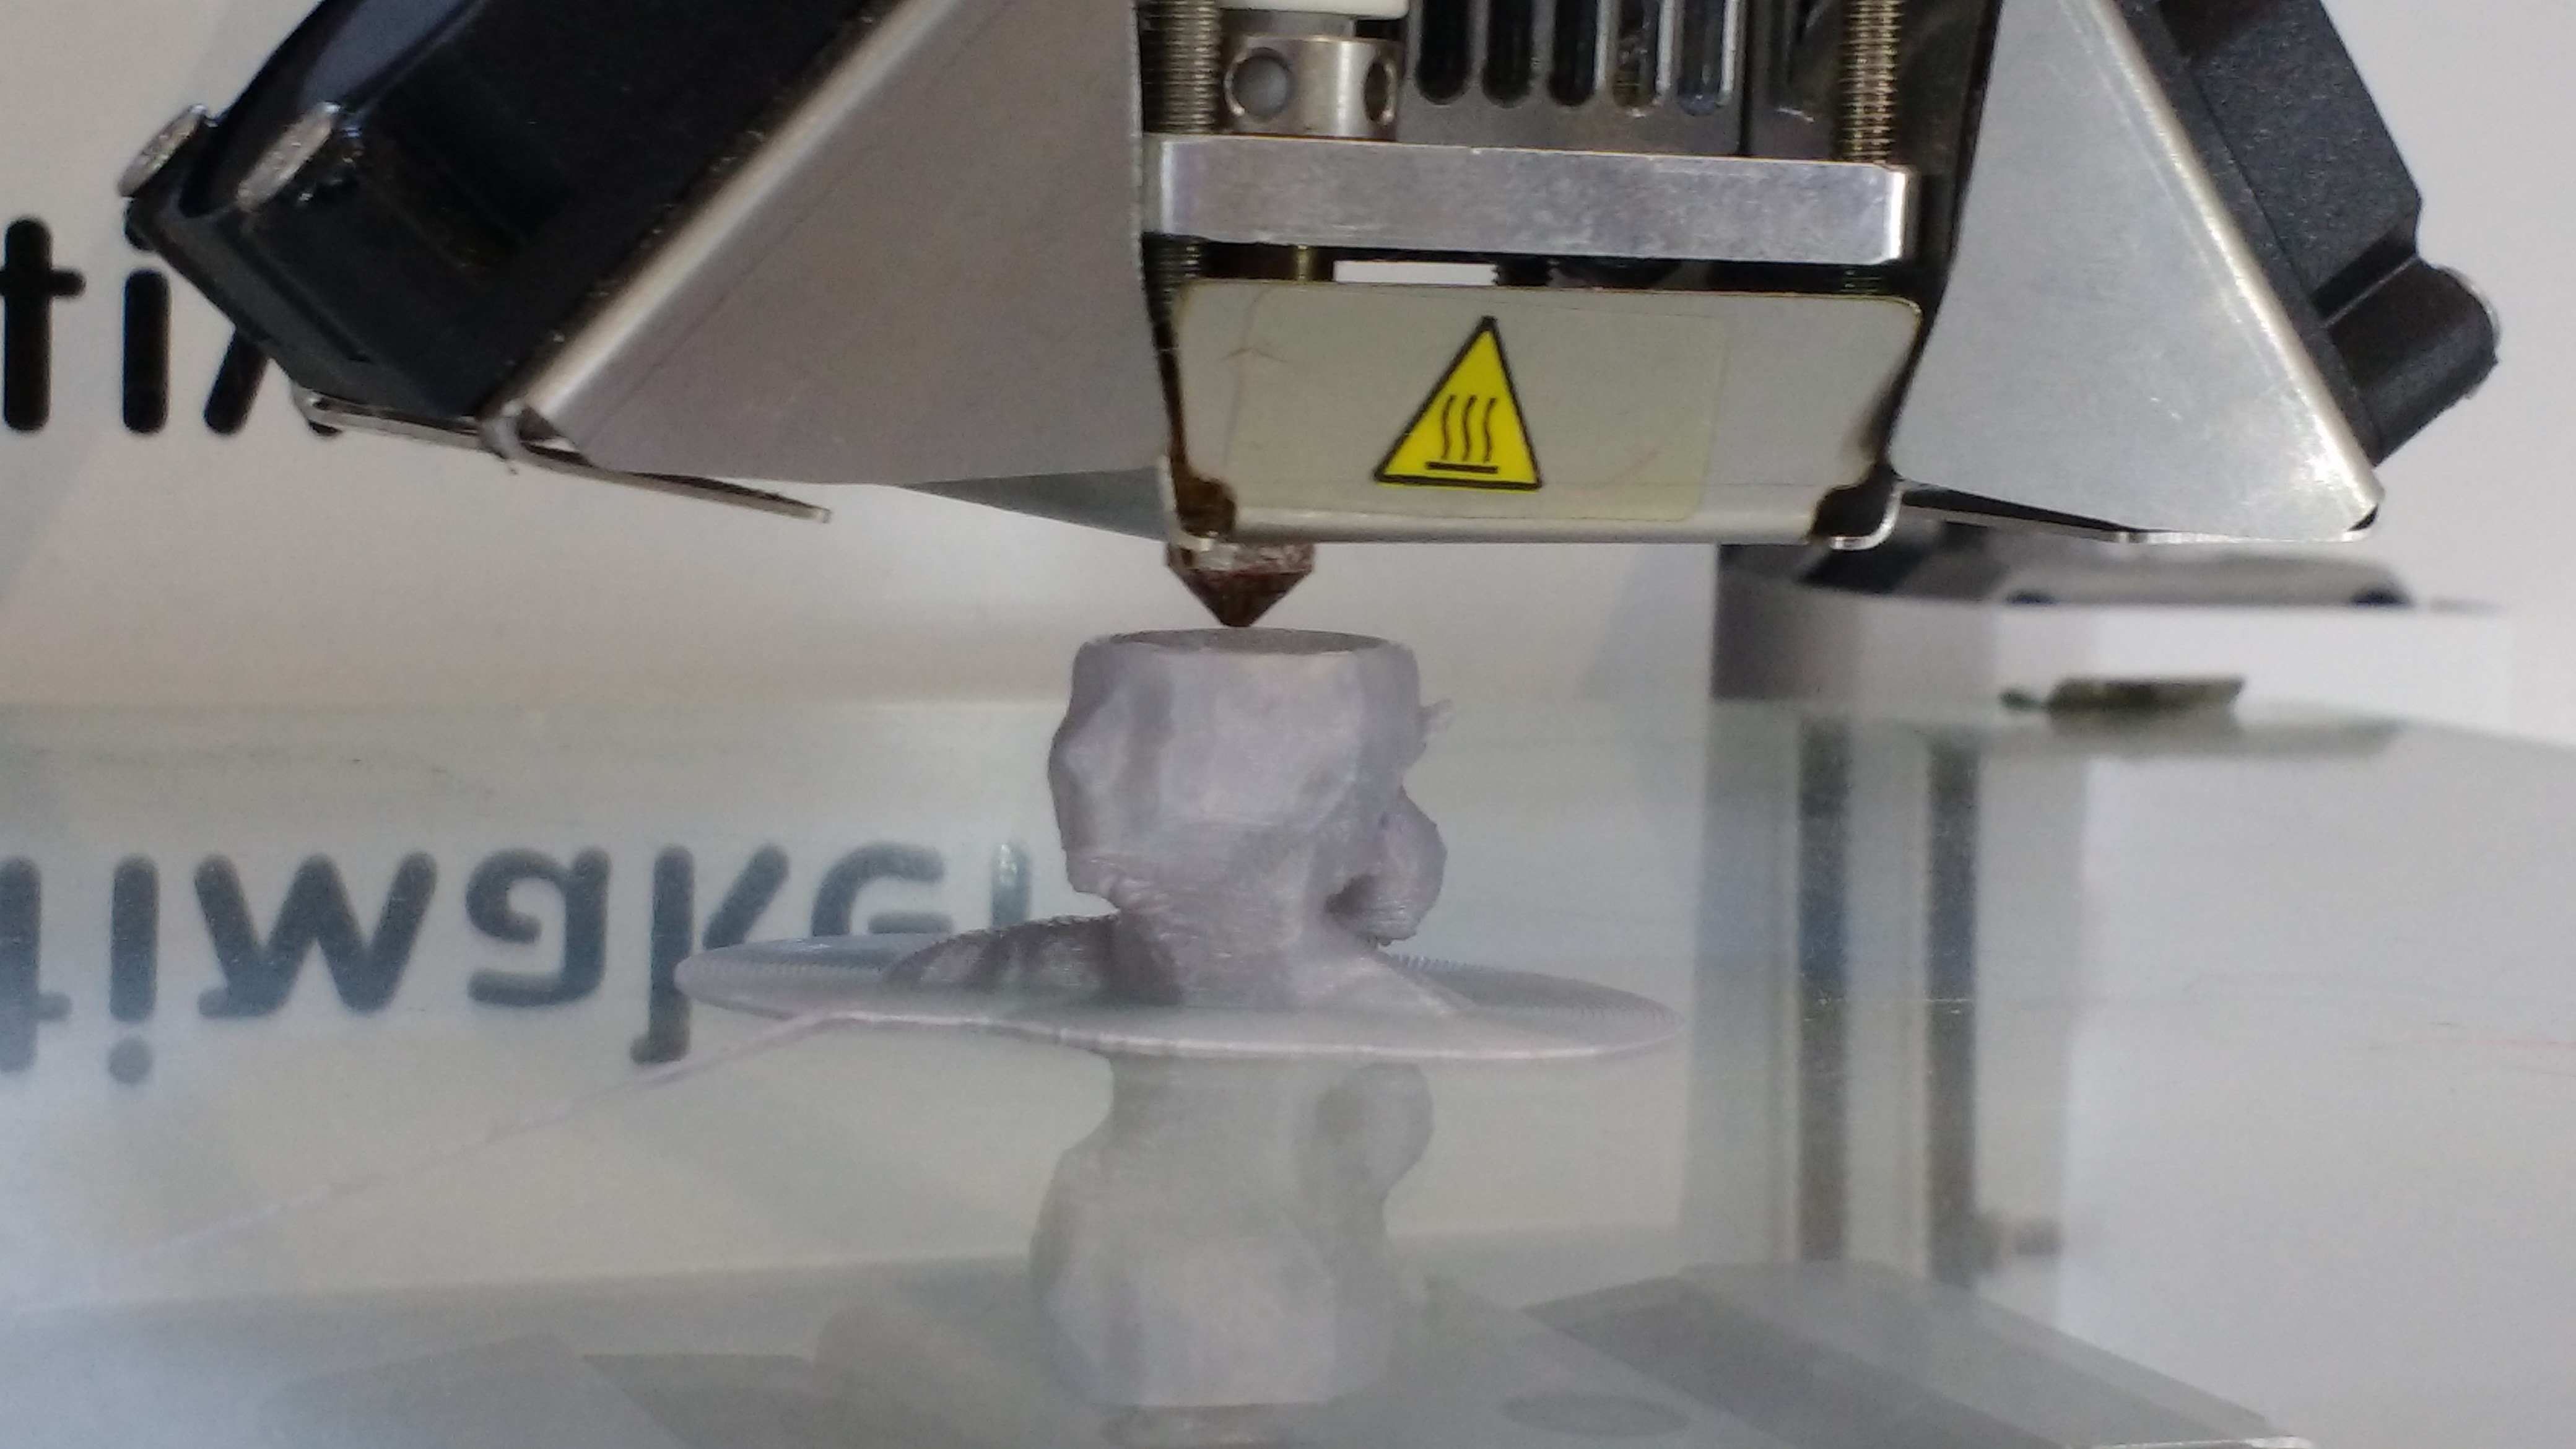 Learning Lab - 3D printing in progress photo by